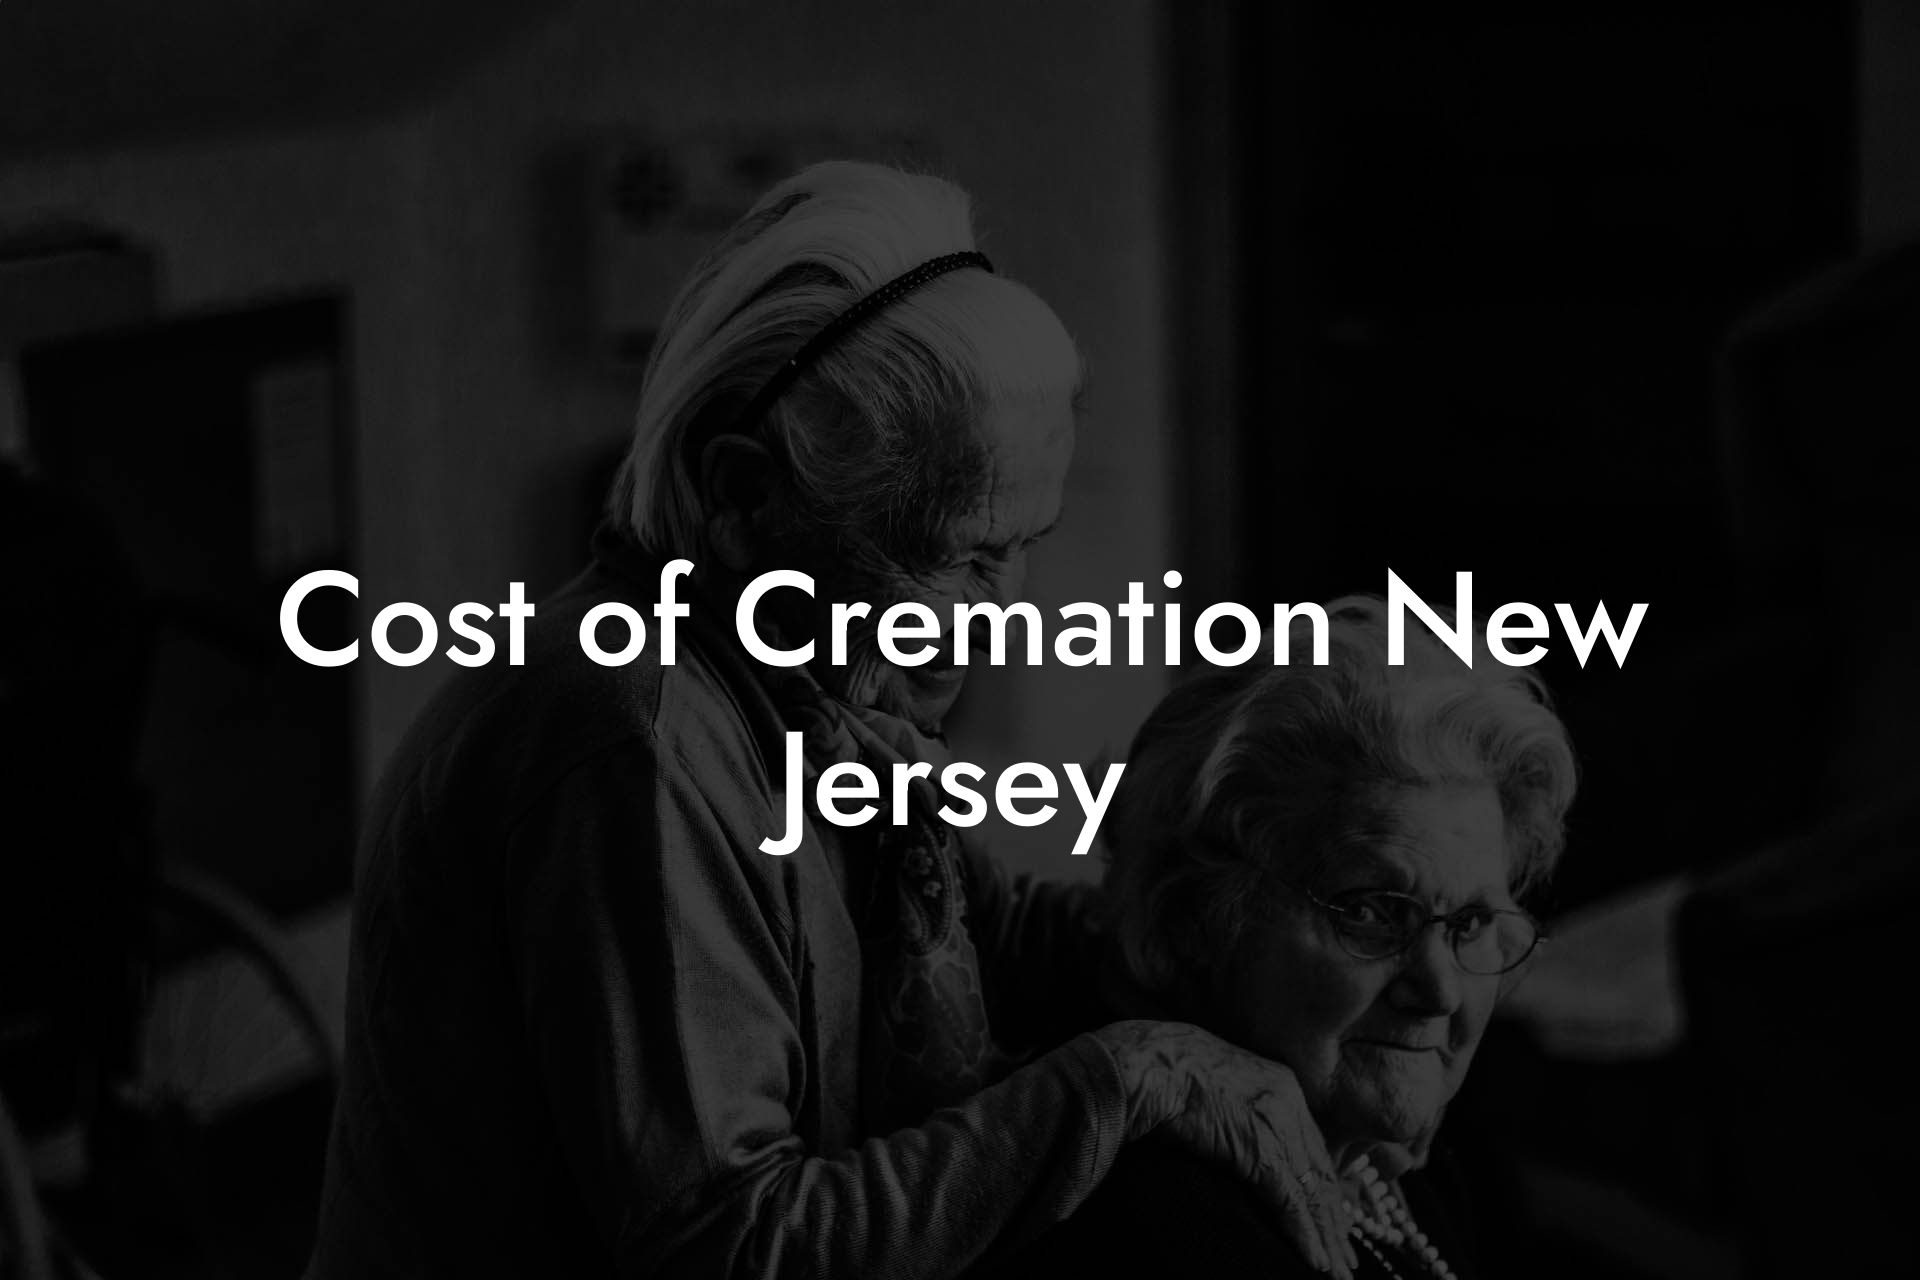 Cost of Cremation New Jersey